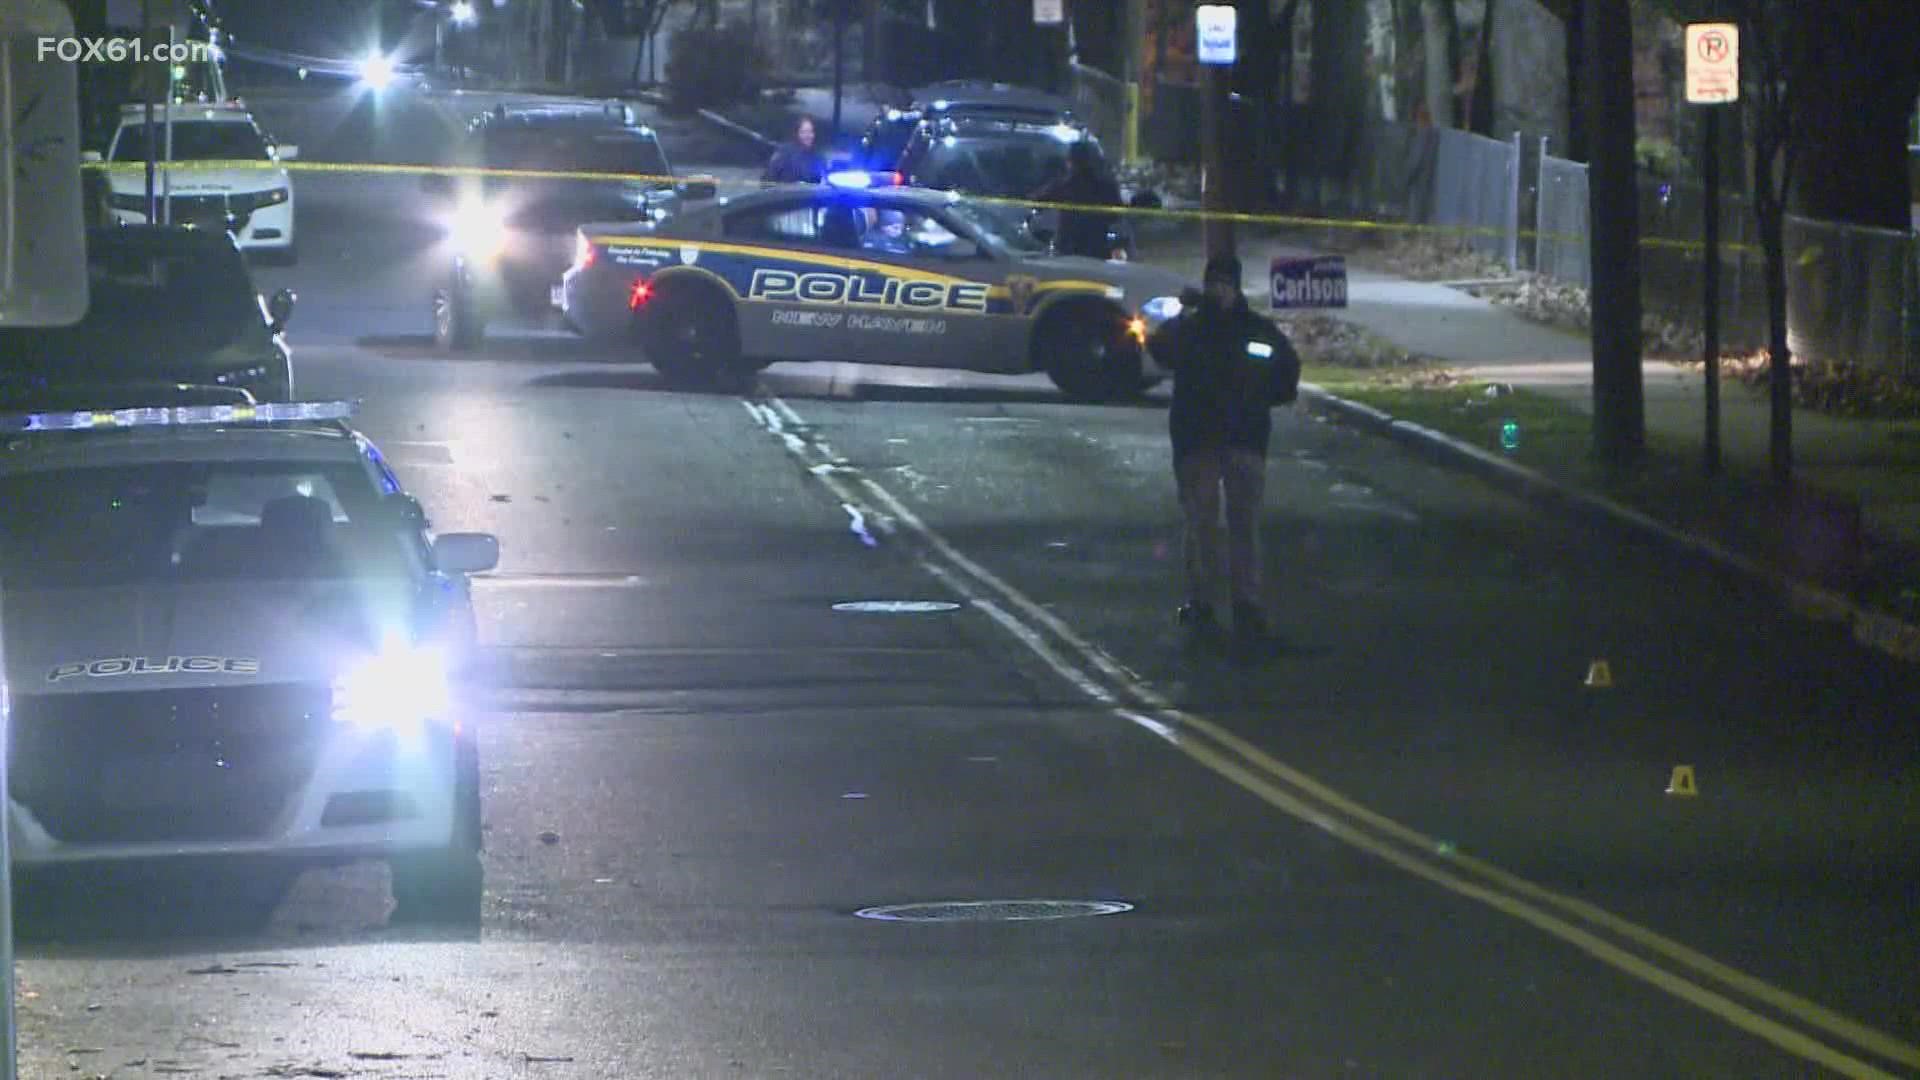 A man is dead after being shot in New Haven on Wednesday night, according to police.